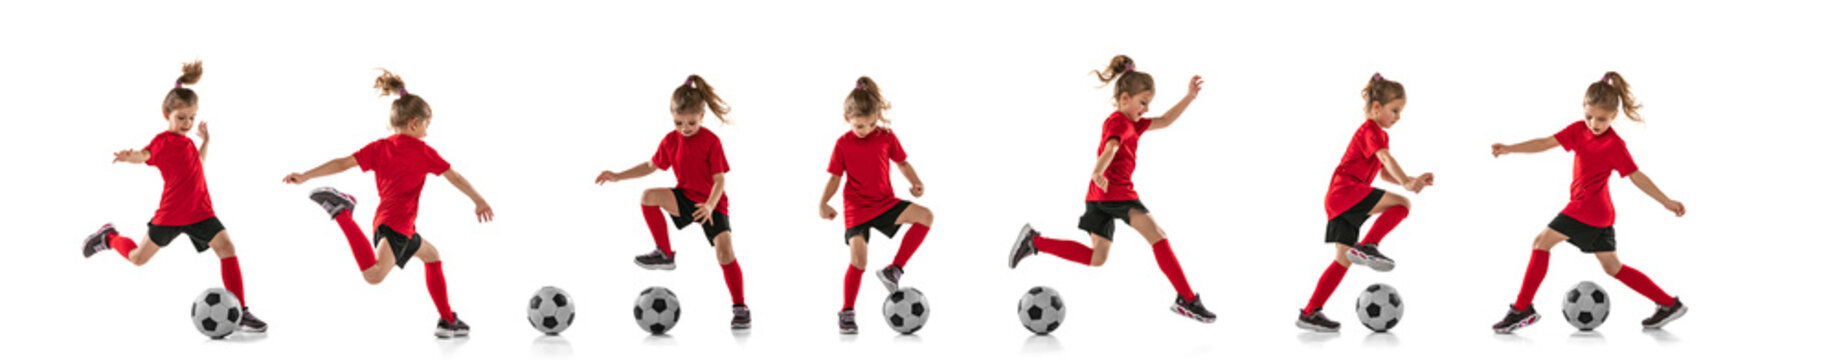 Full-length portrait of little girl, child, training, playing football isolated over white background. Collage